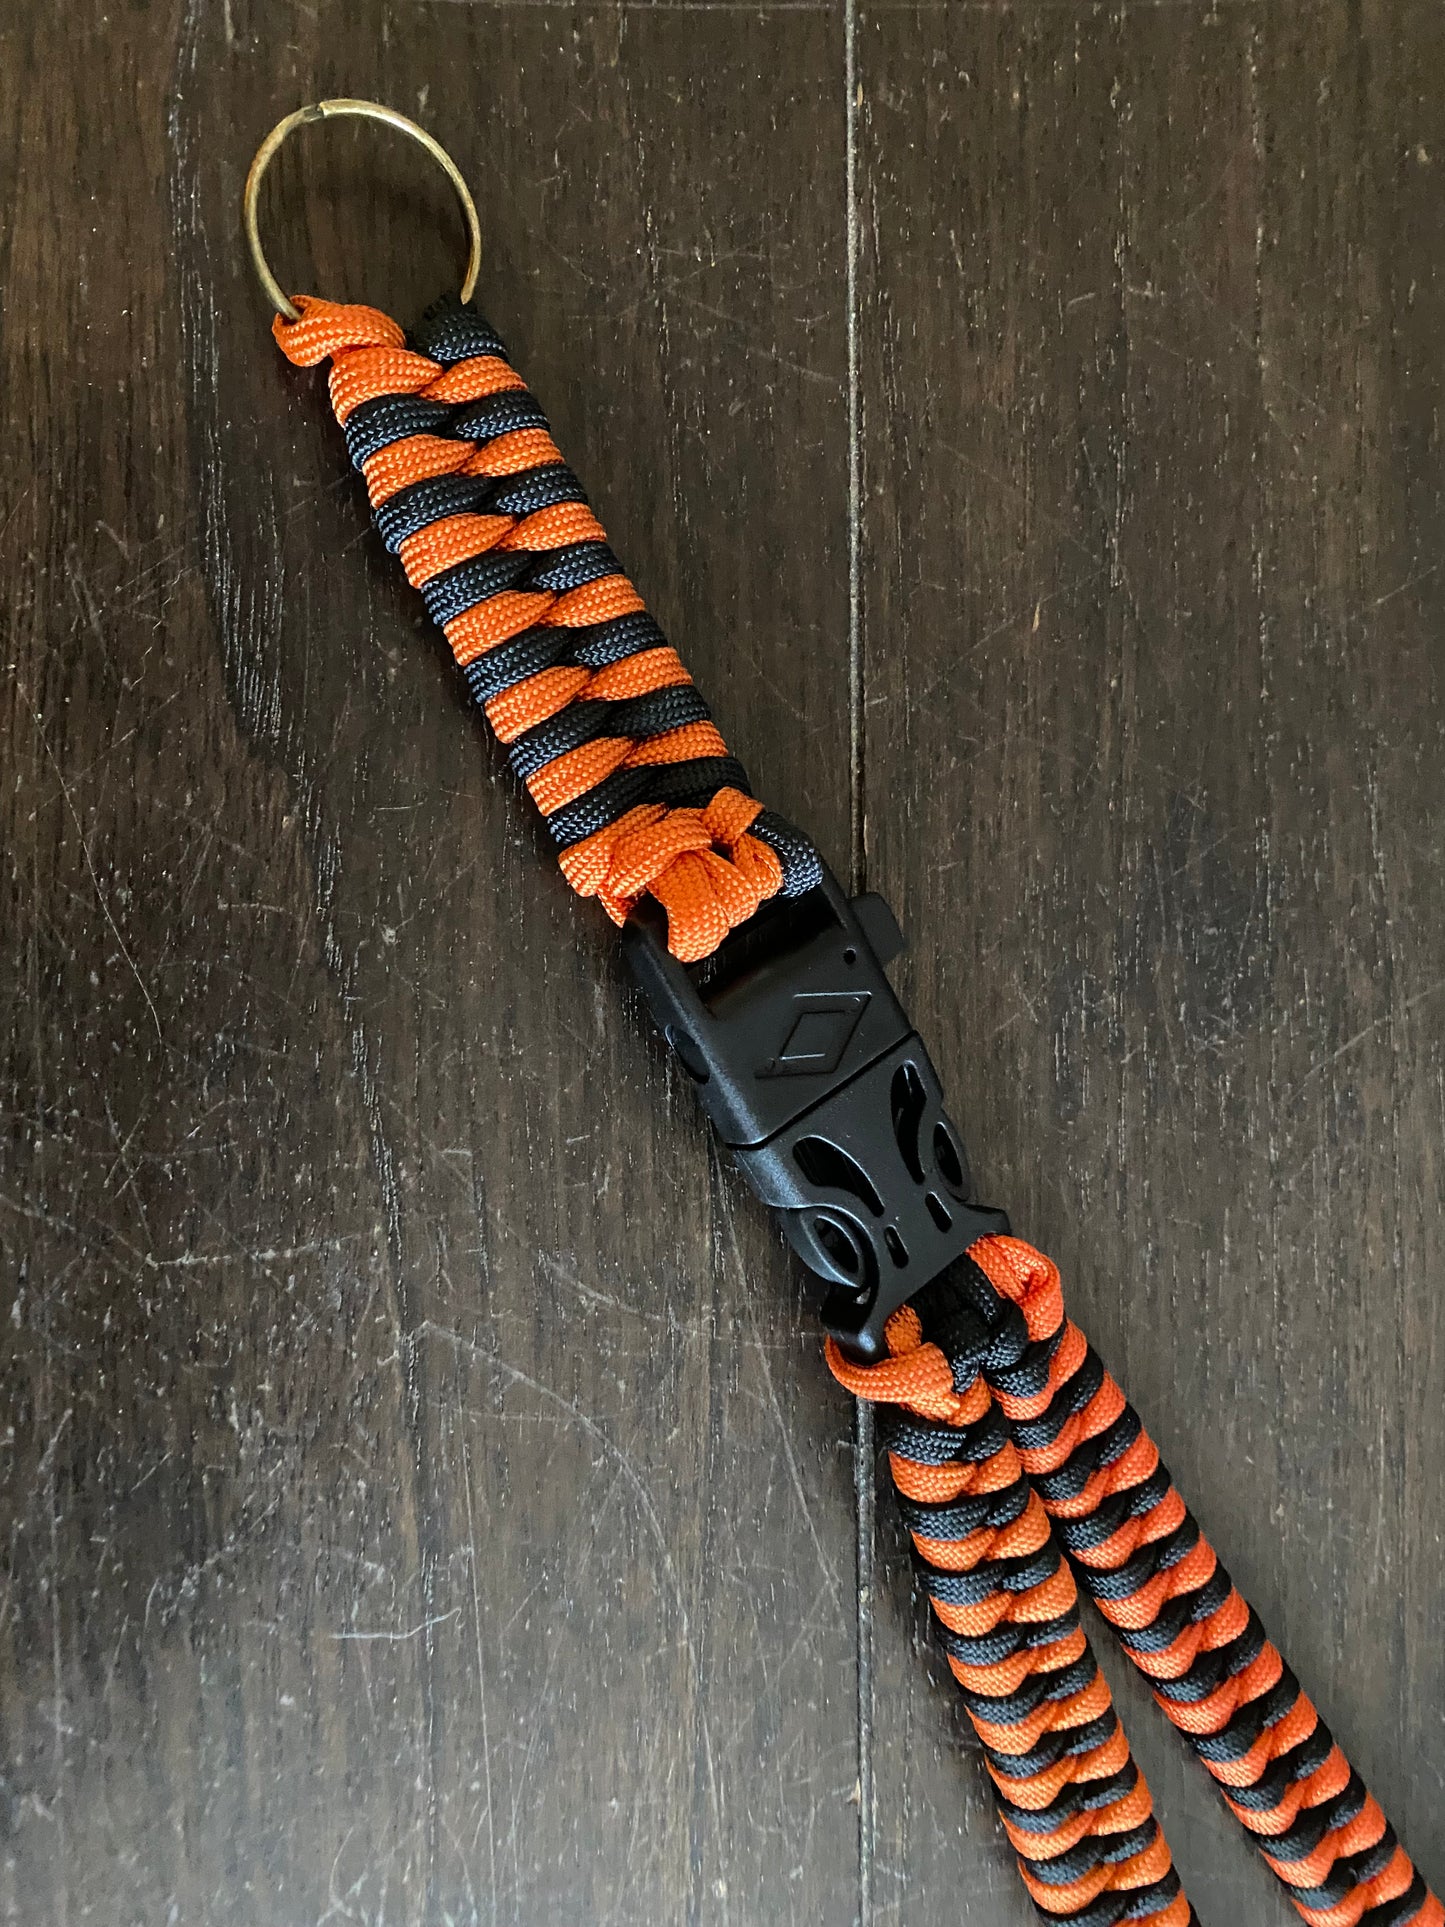 Premade Paracord Fishtail Lanyard, Orange and Black with Keyring